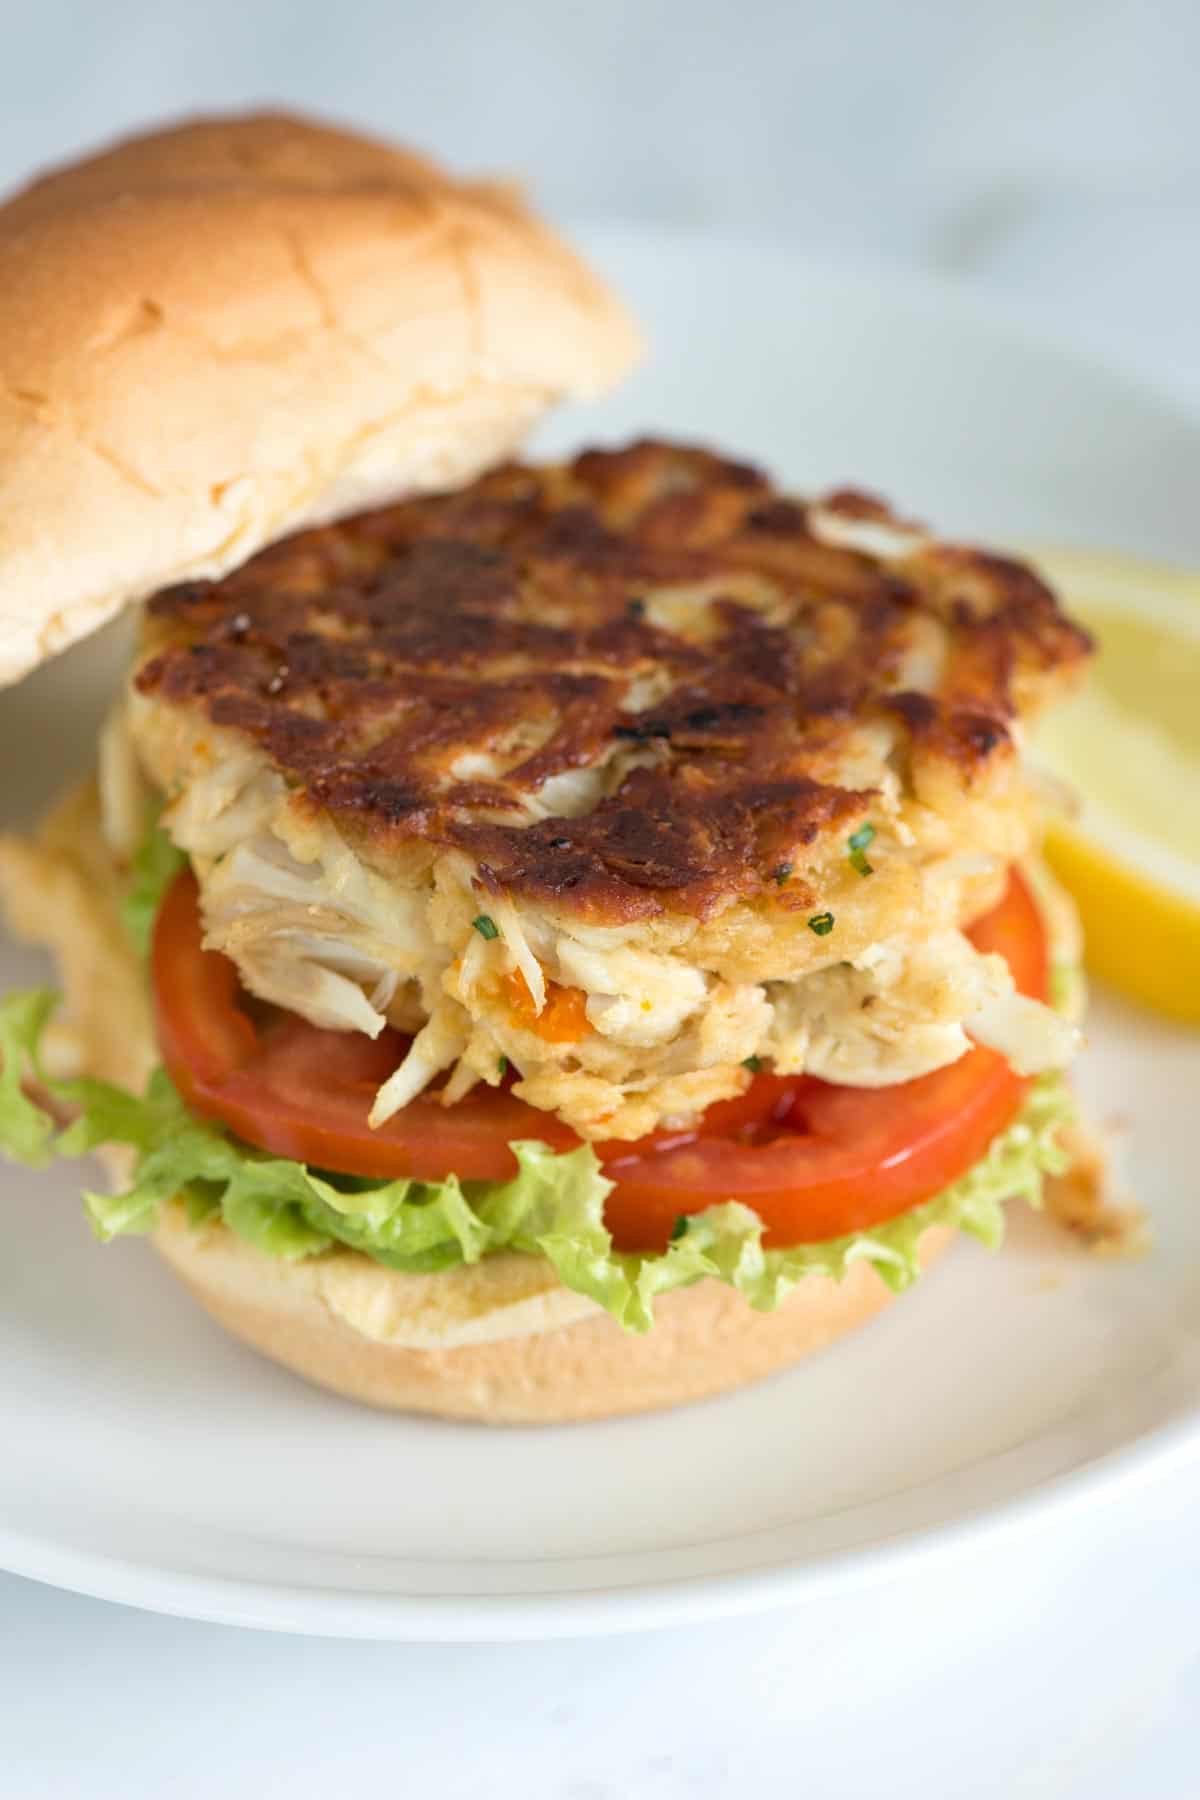 How To Make The Best Crab Cake Ever!